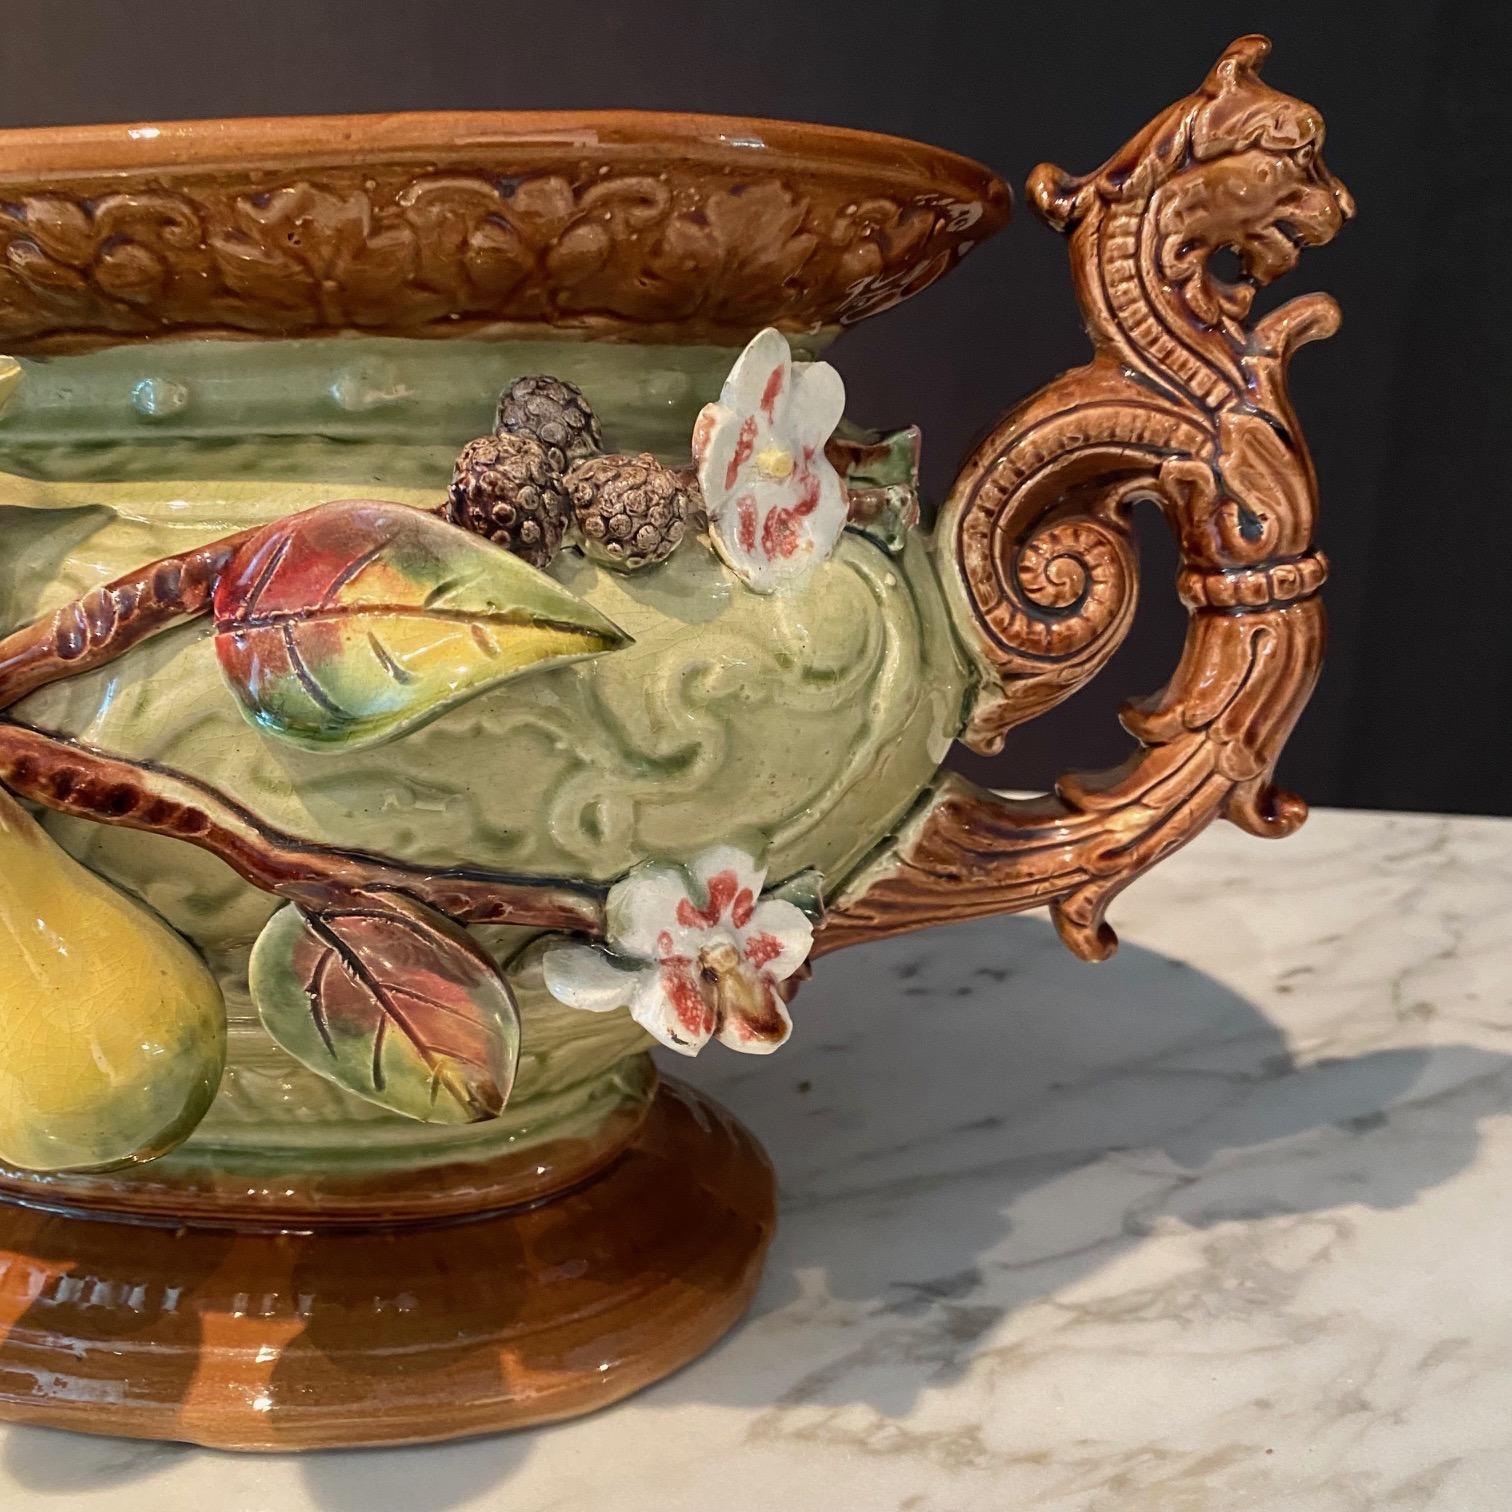 Really lovely French soup tureen or jardiniere, bought in the south of France. Aesthetic movement, with robust fruit depicted in sculpted pears on vines with blooming flowers. Handles are wide eyed tigers, and on the other side is a bearded